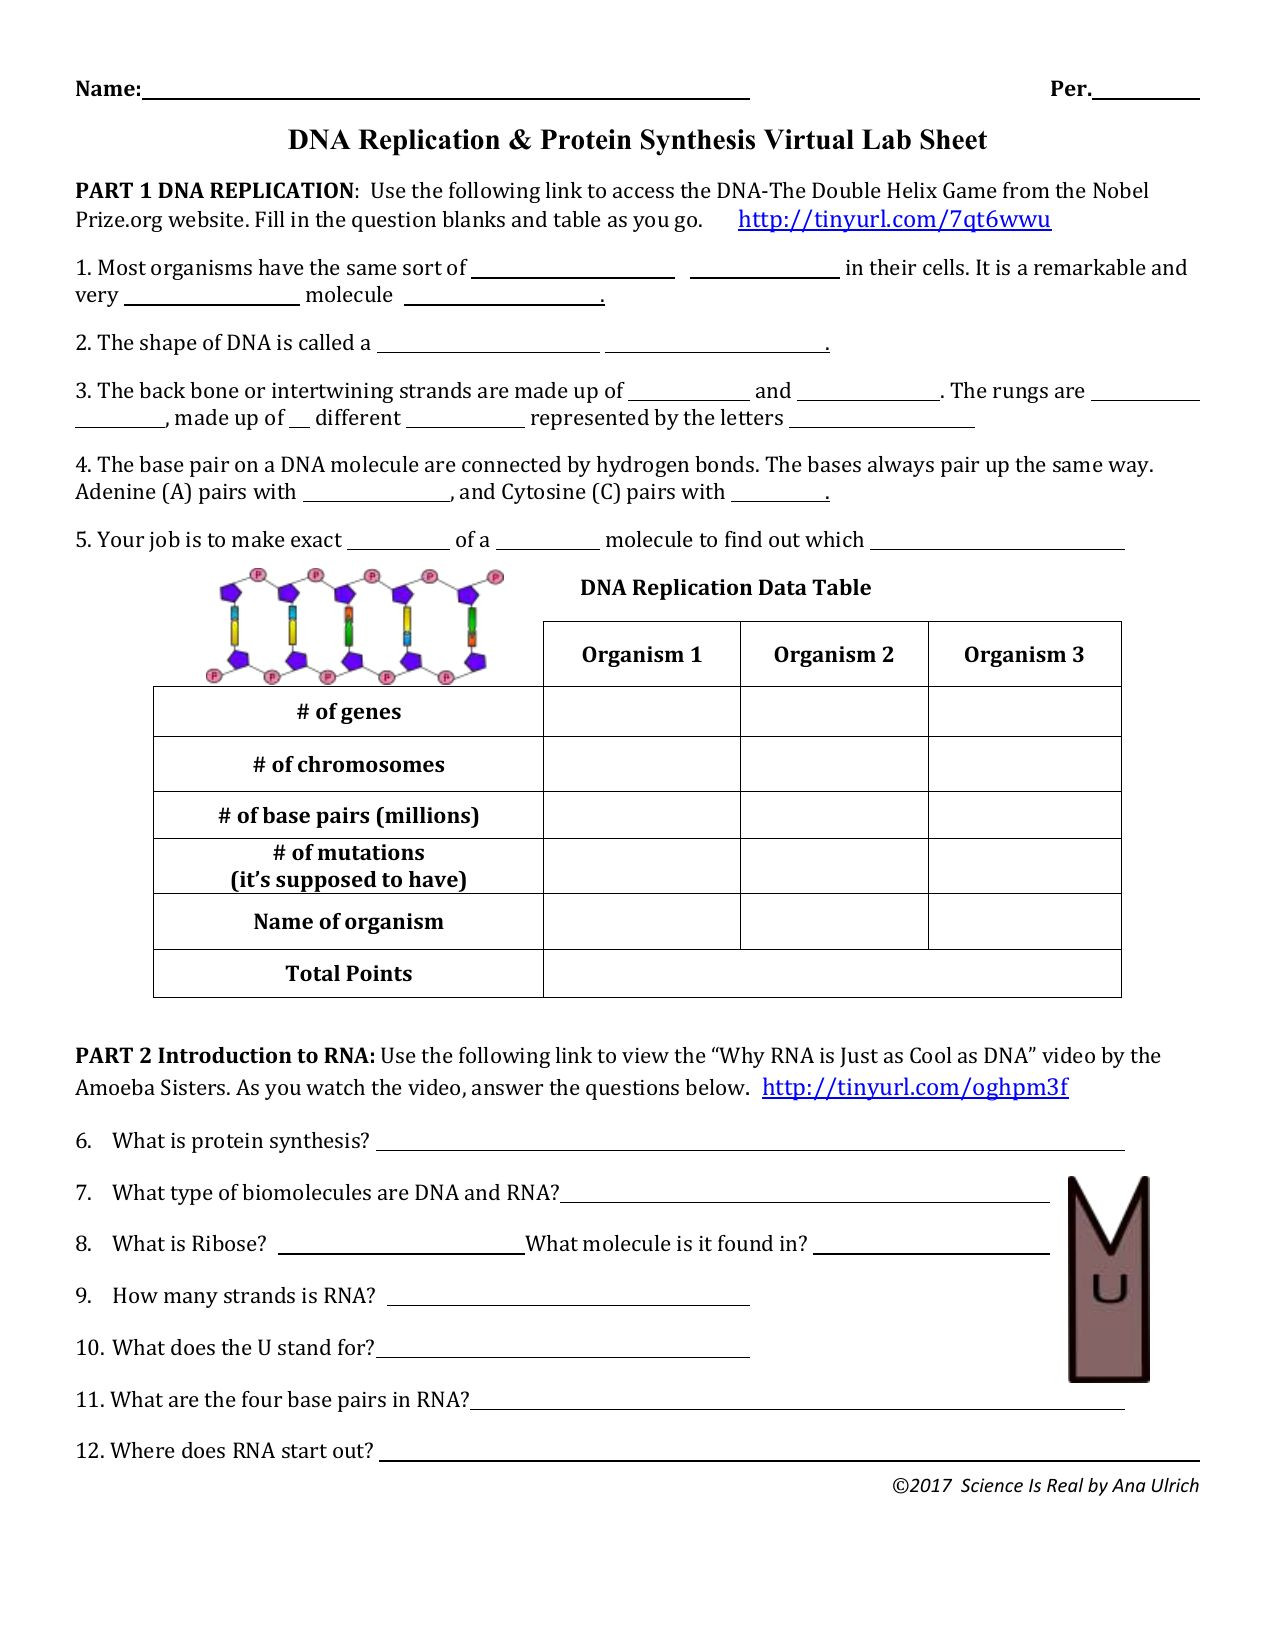 Protein Synthesis Review Worksheet Answers Dna Replication Protein Synthesis Worksheet